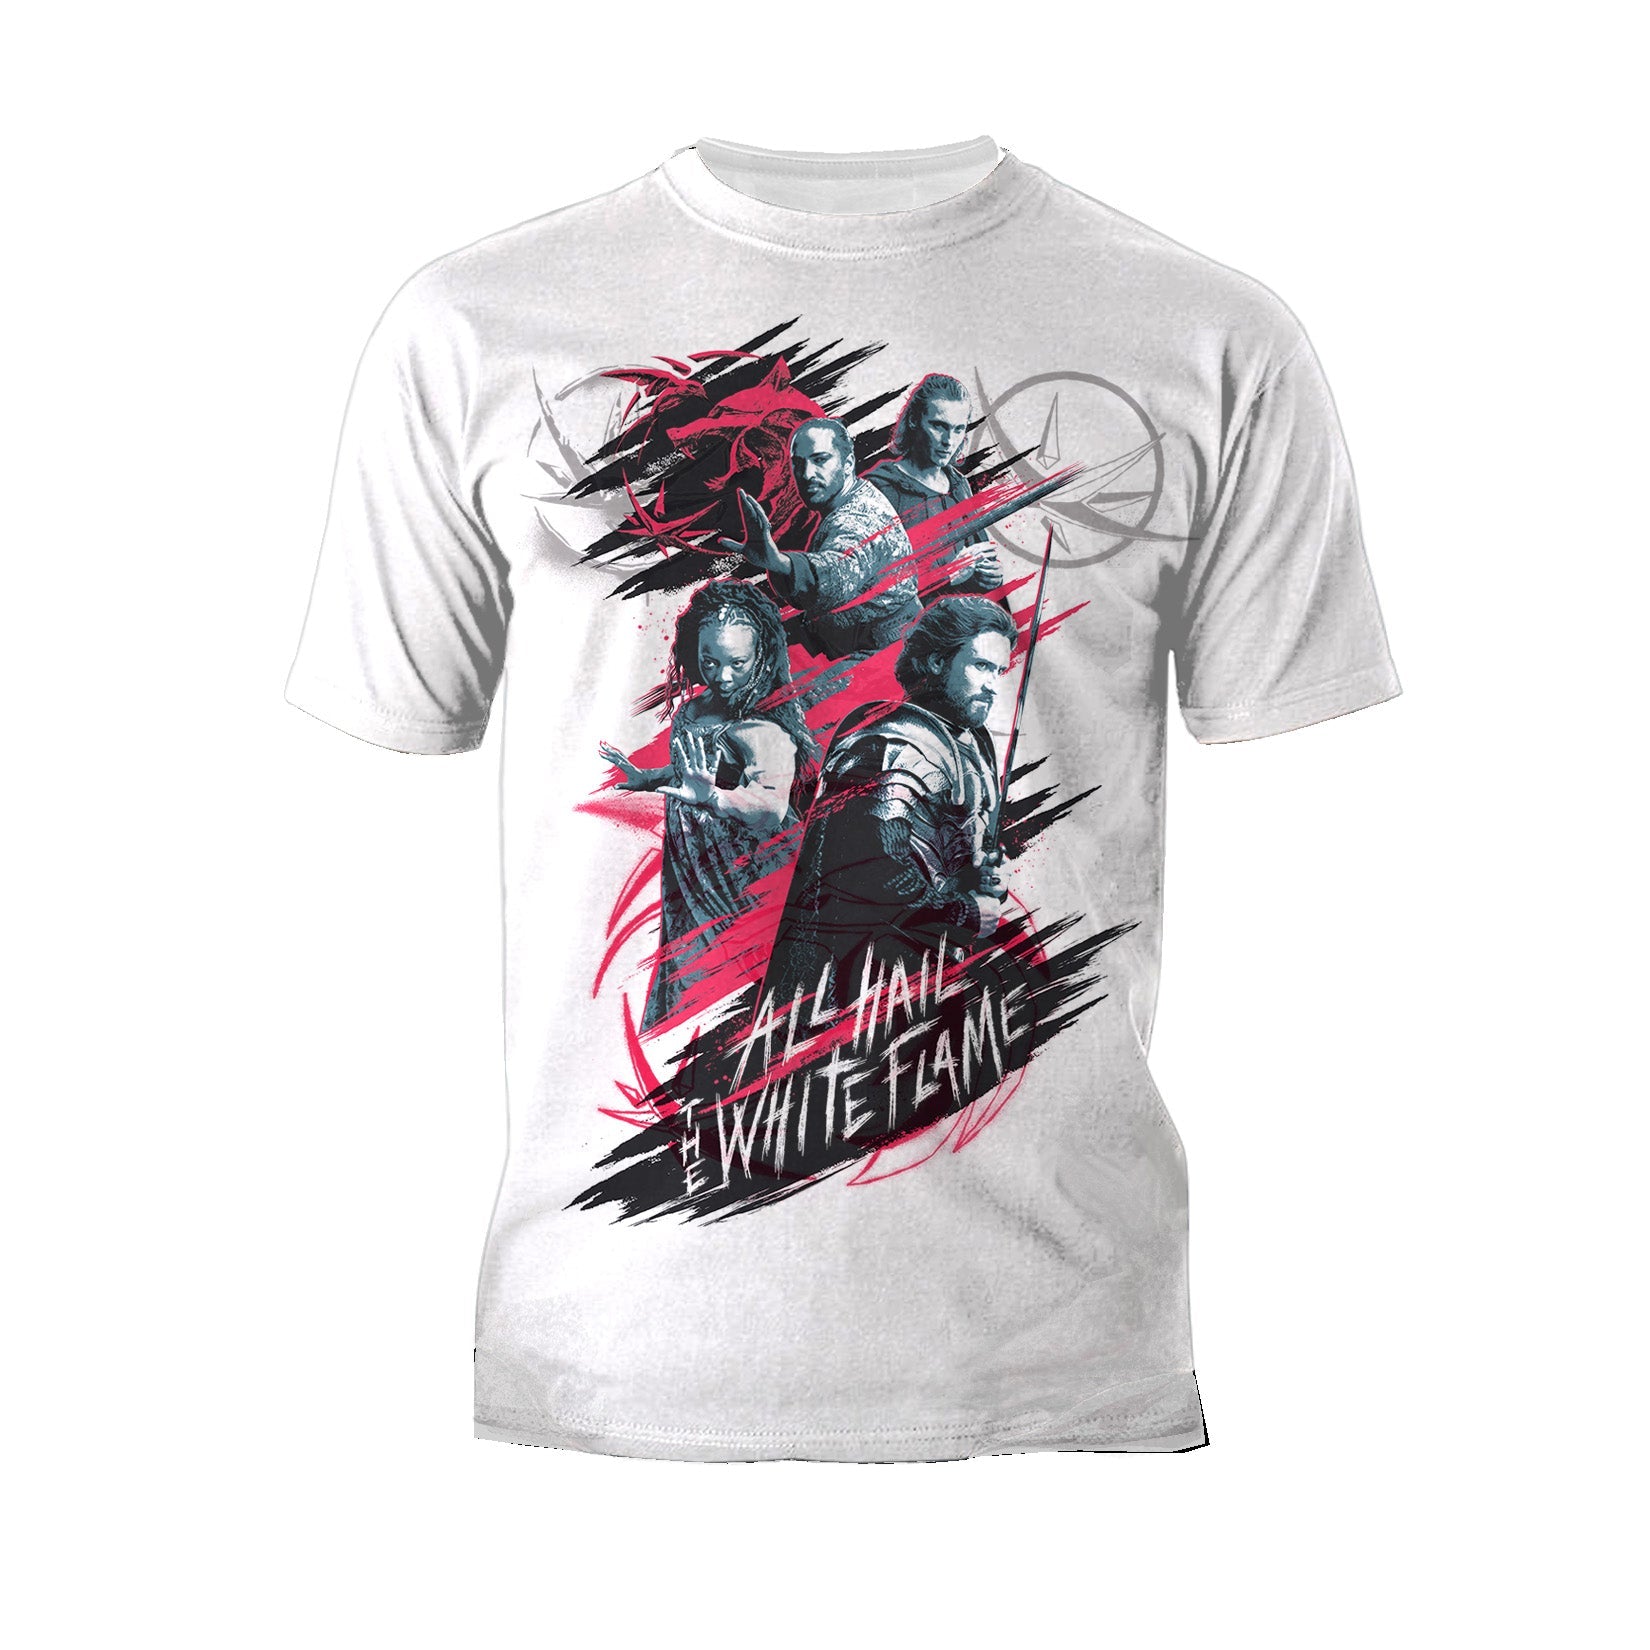 The Witcher Splash White Flame Official Men's T-Shirt